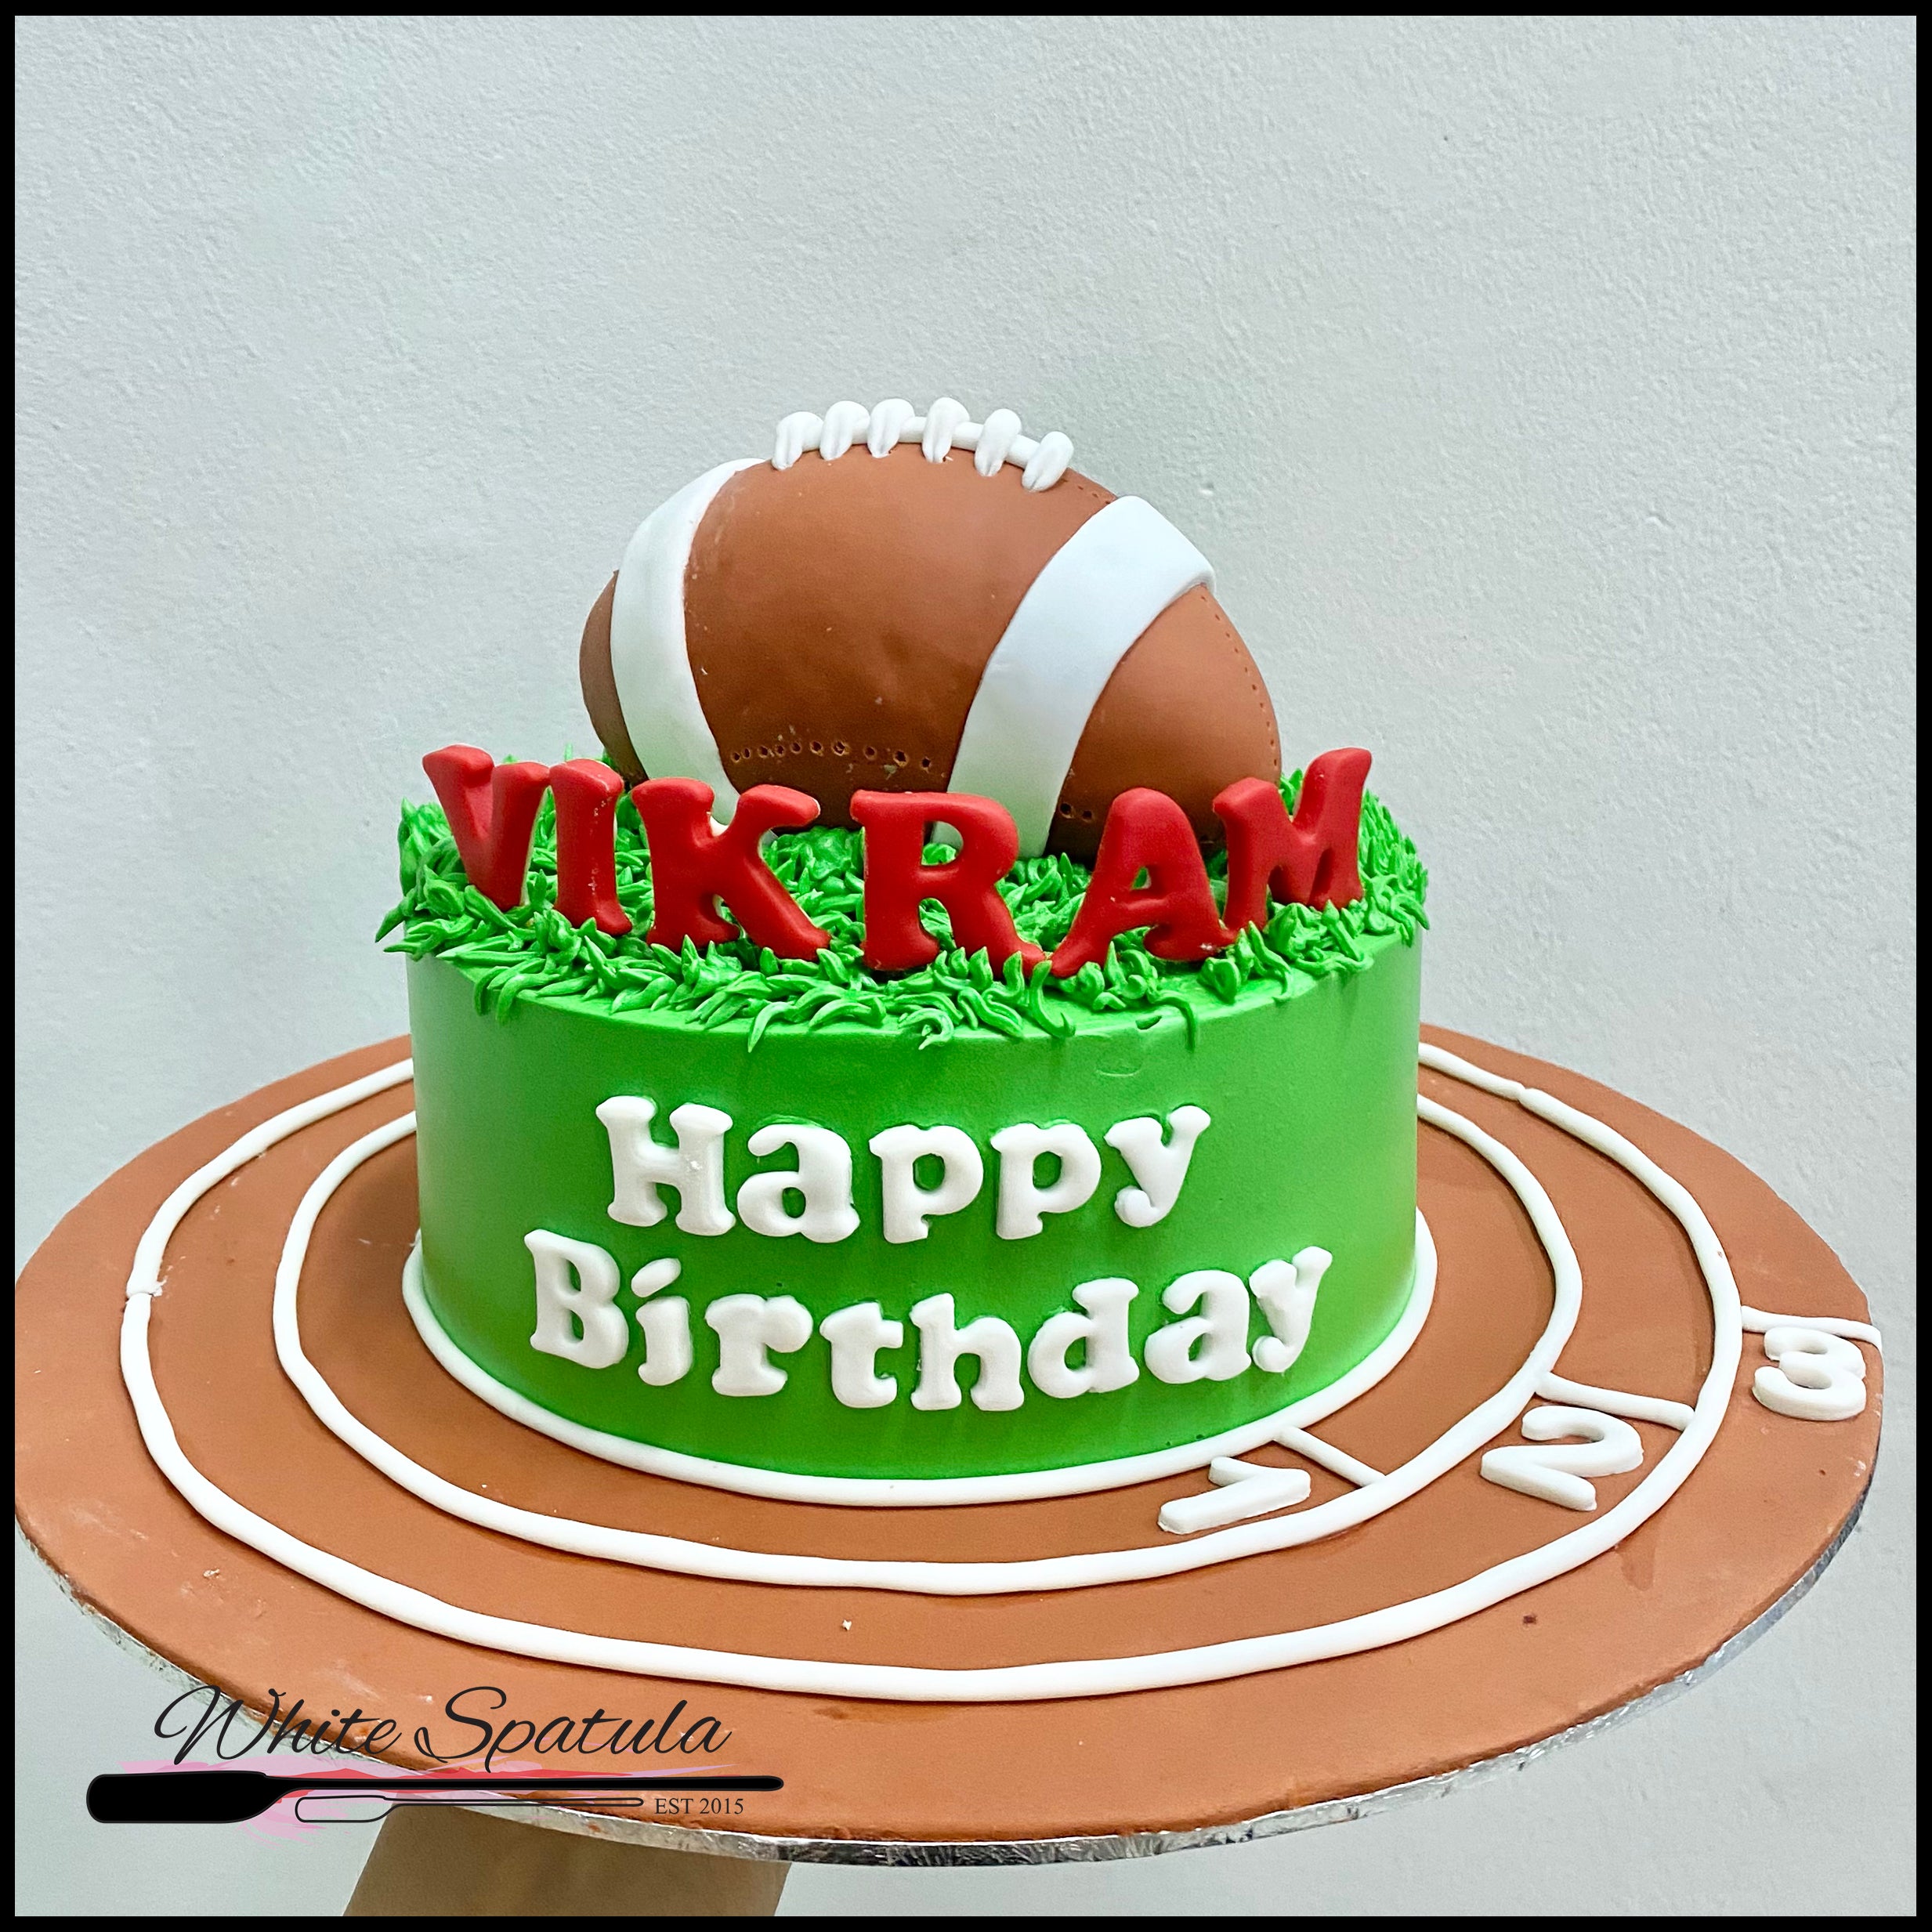 Number Rugby Ball Birthday Cake No.N040 - Creative Cakes